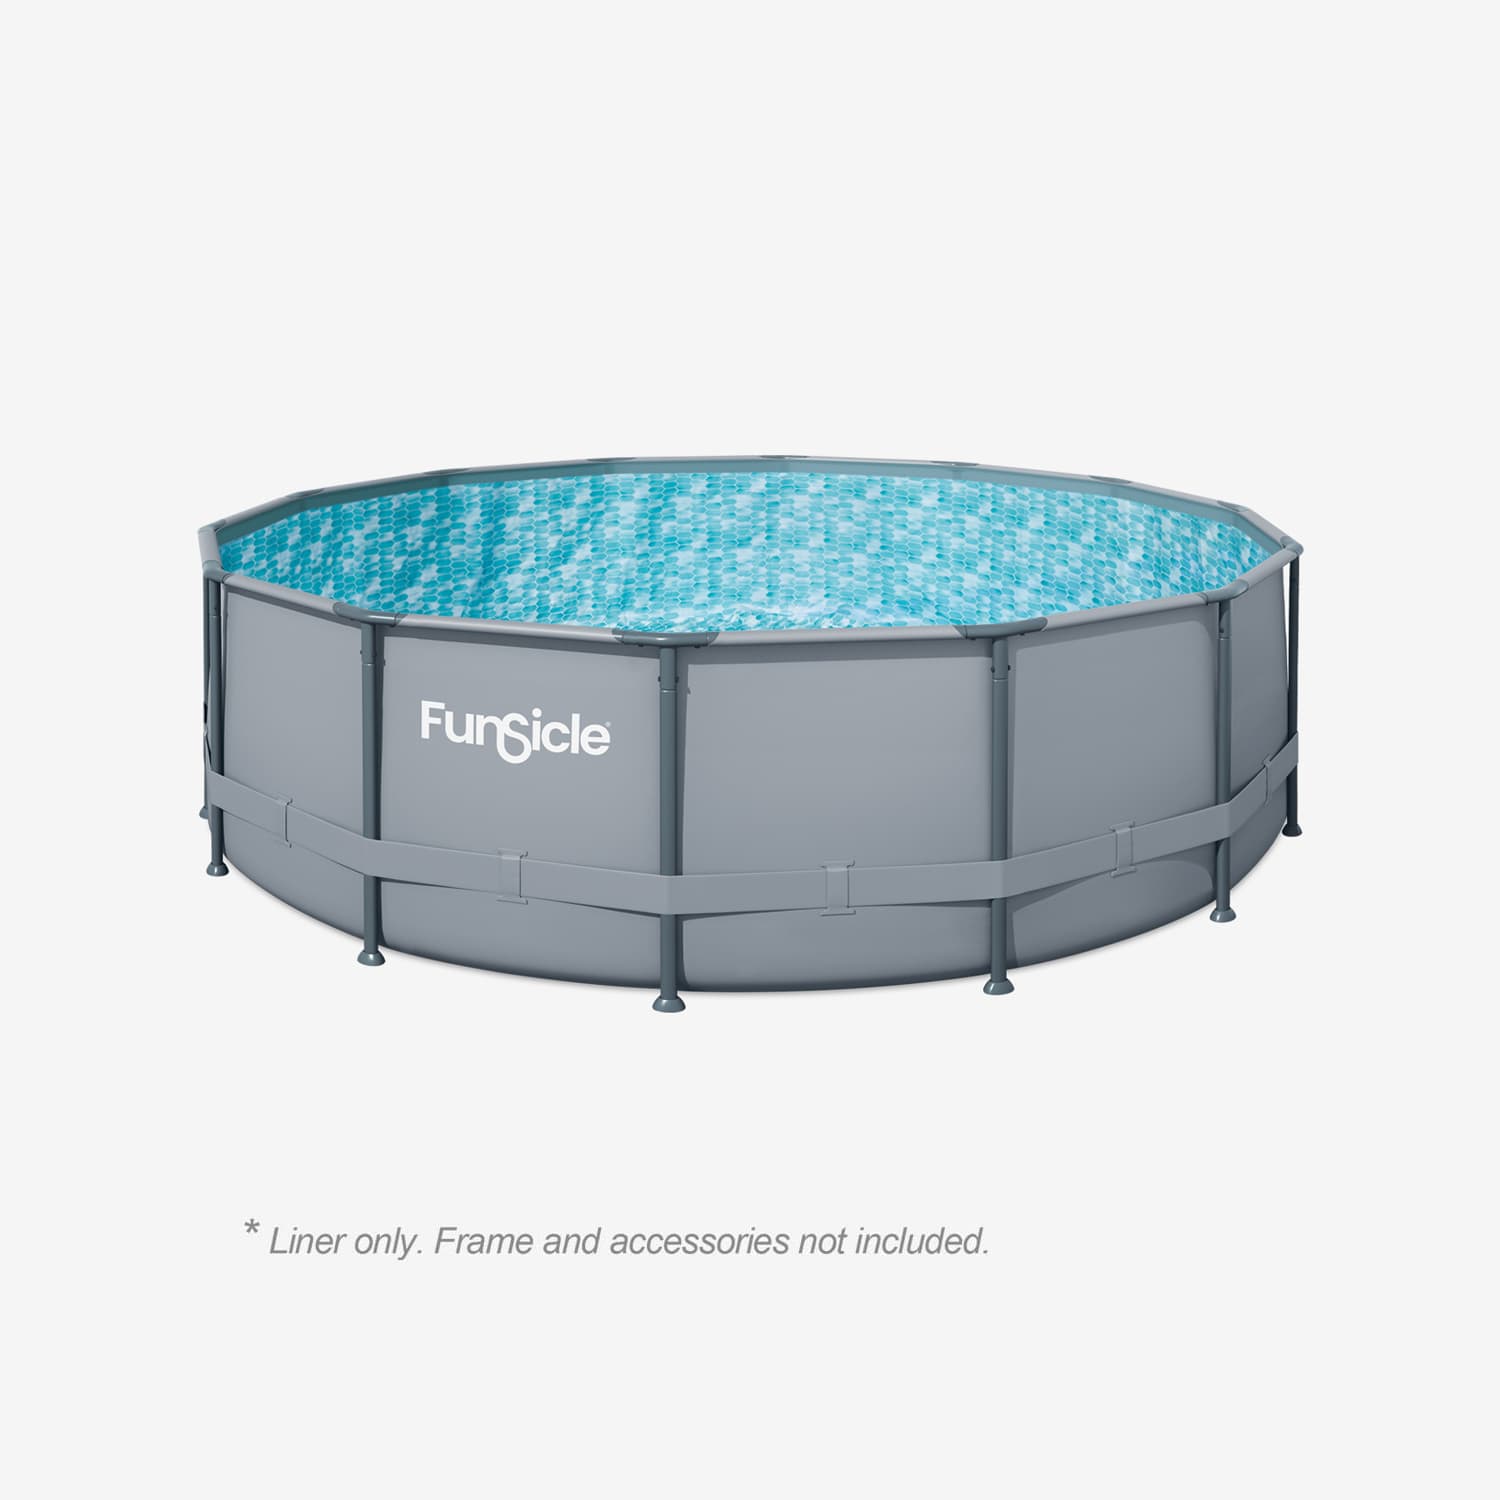 Funsicle 14 ft Oasis Pool Liner